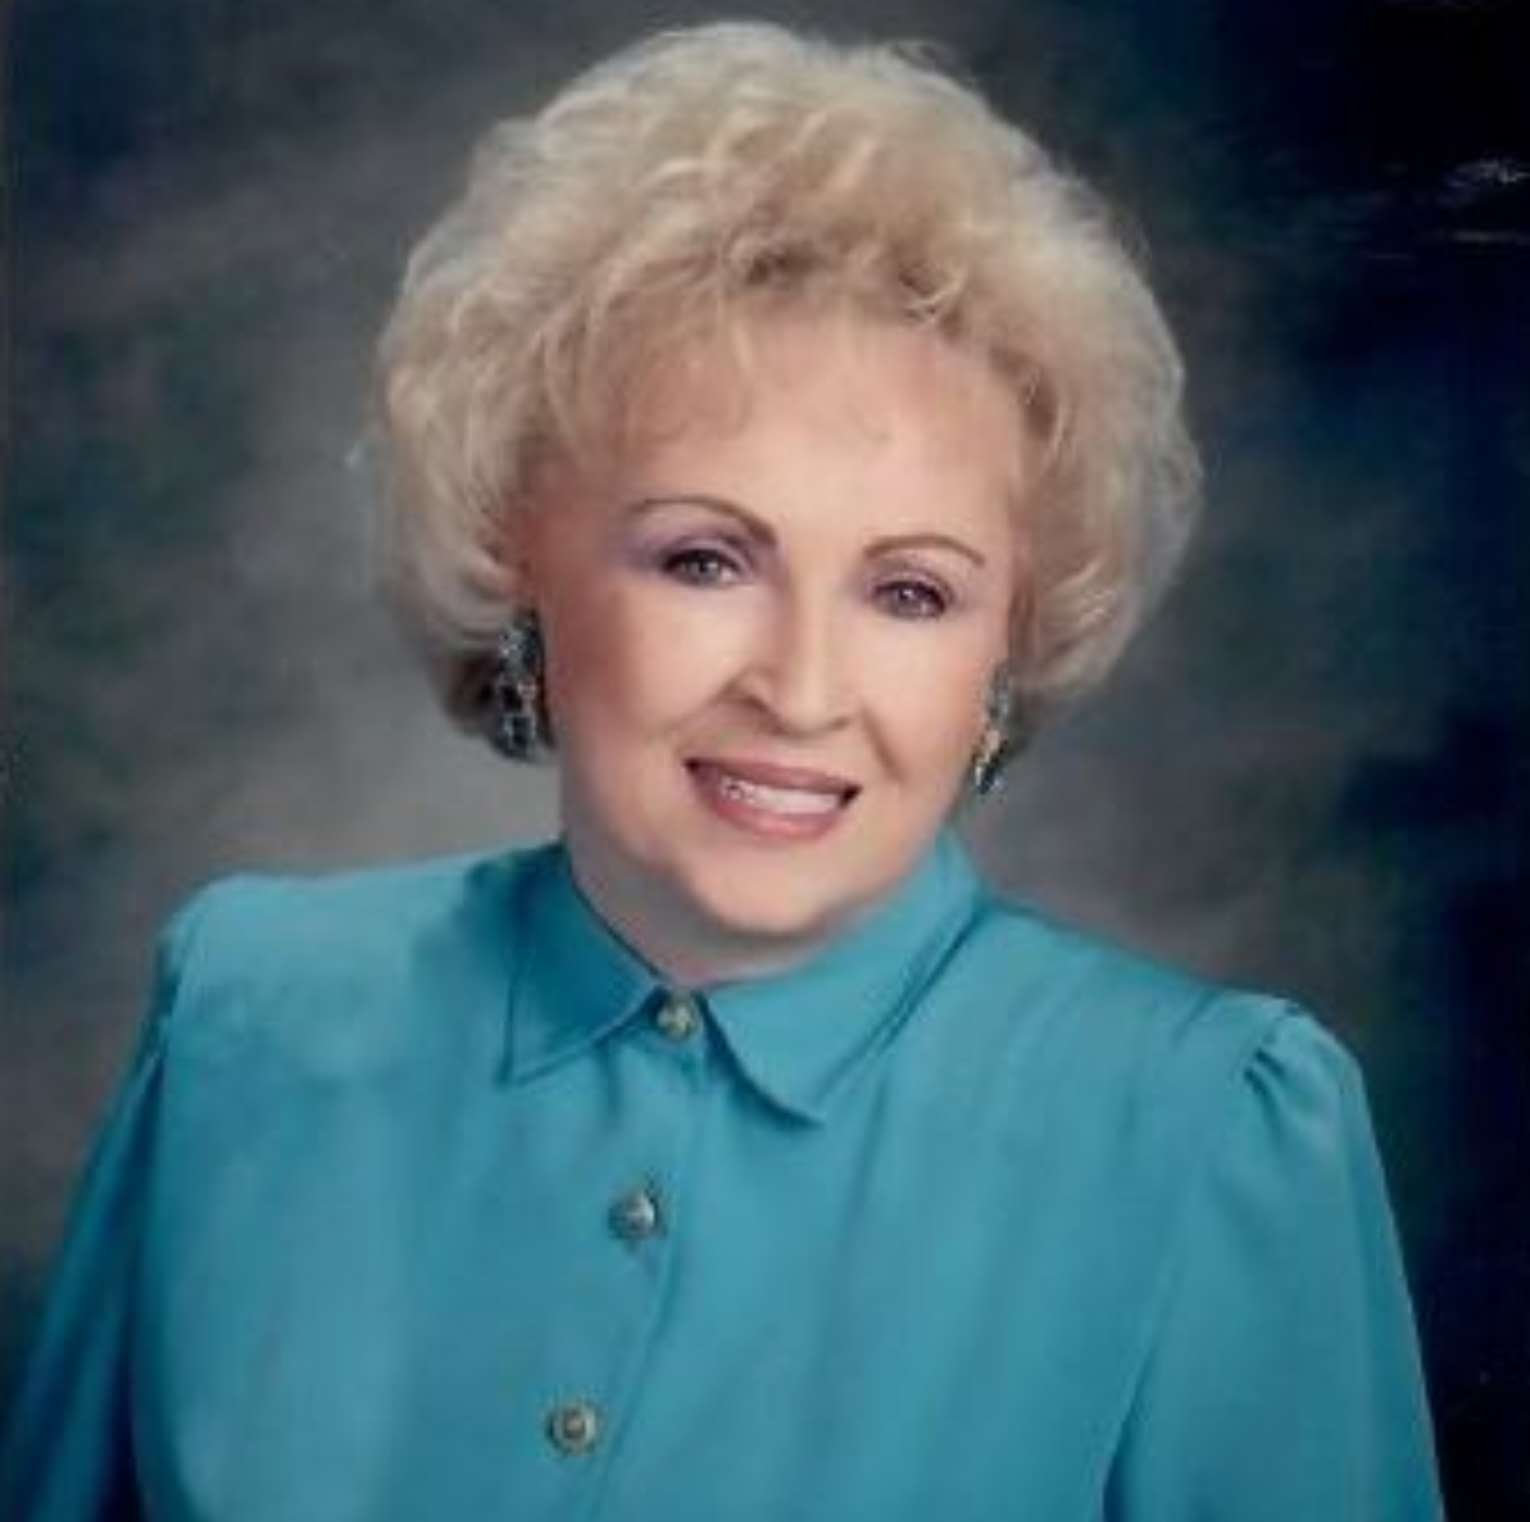 Conservative Activist, Advocate Beverly LaHaye Dies at 94